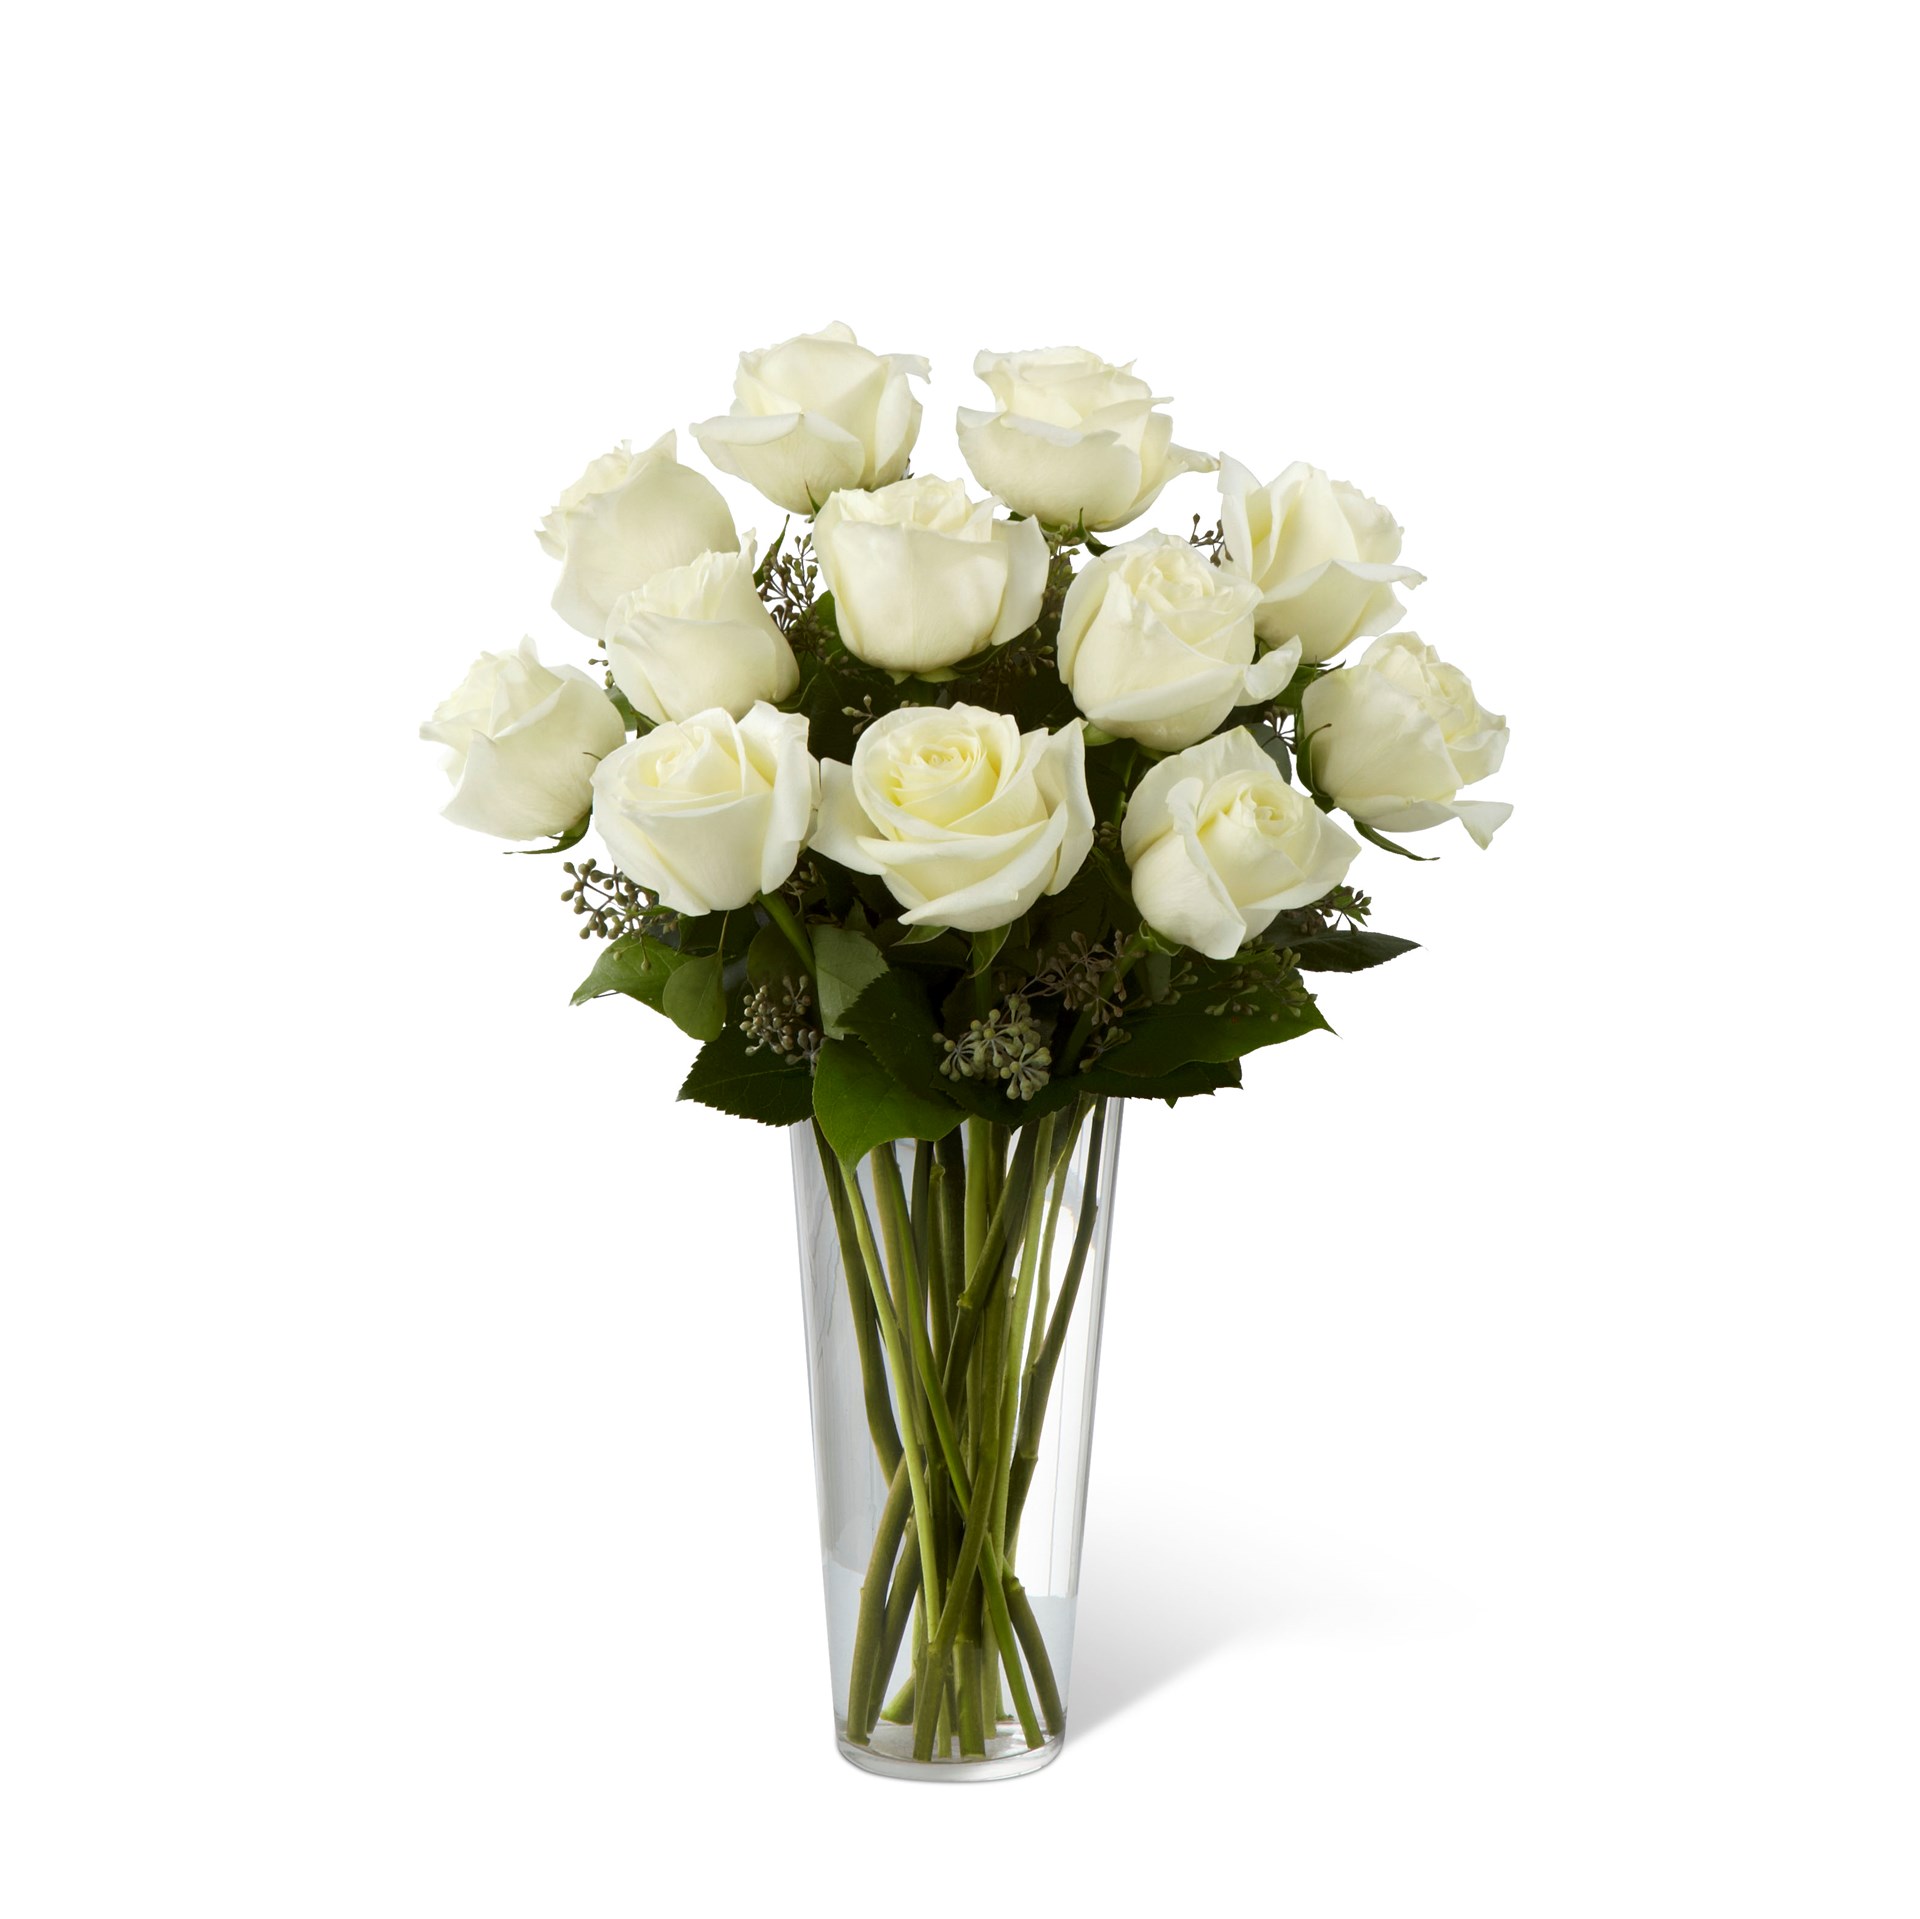 product image for The White Rose Bouquet by FTD